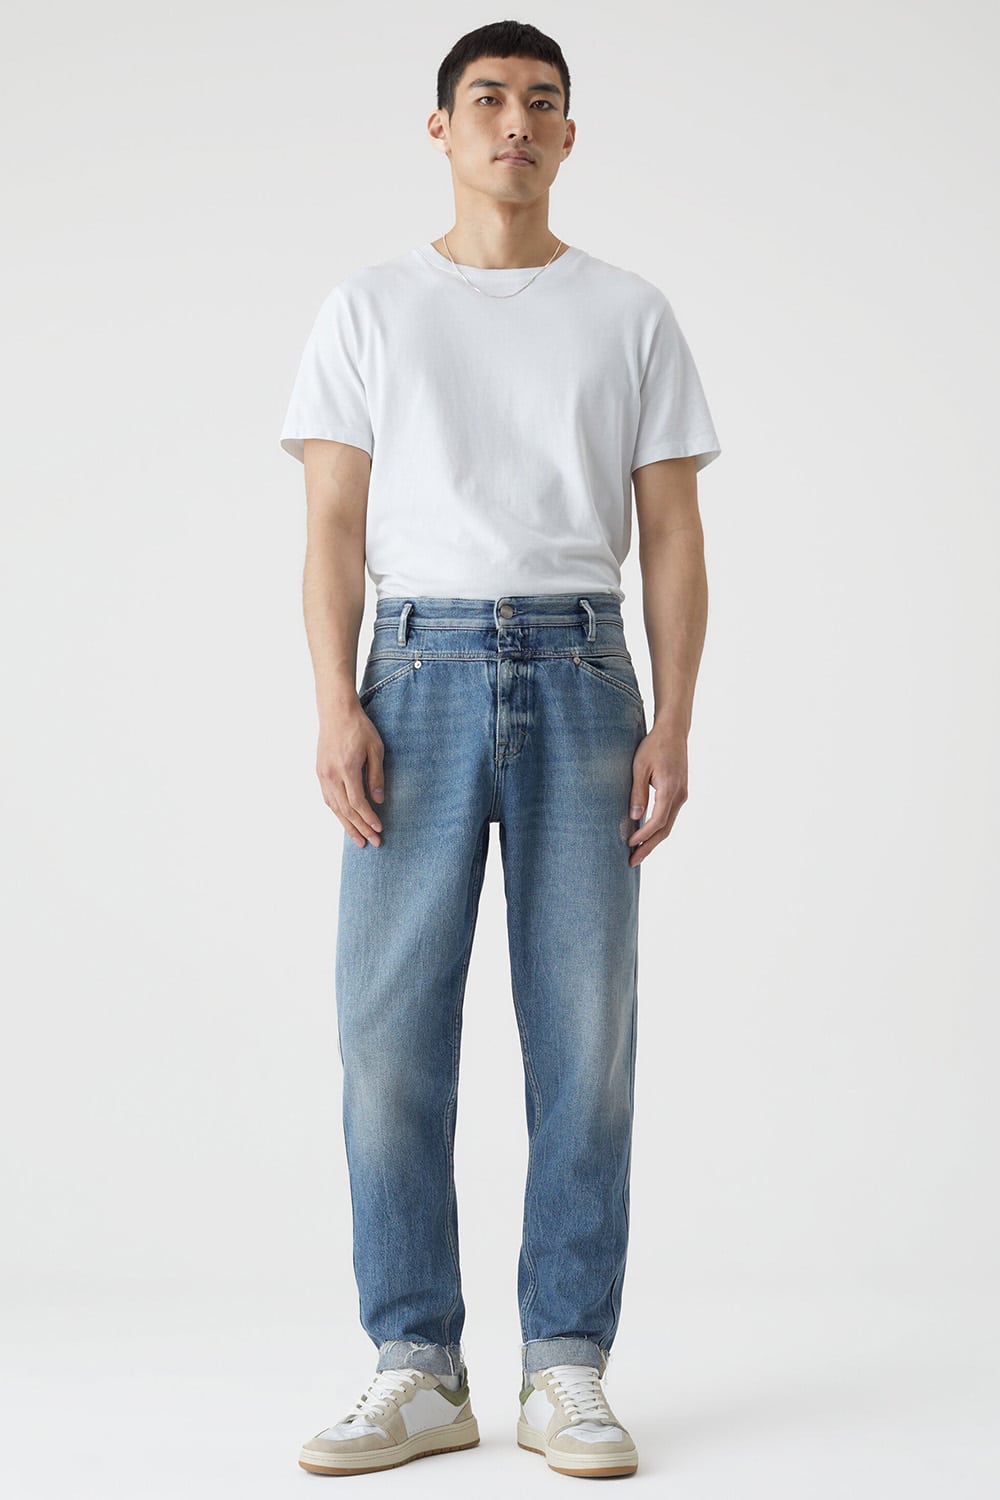 Baggy Jeans Outfits: 19 Cool Looks That Work In 2023